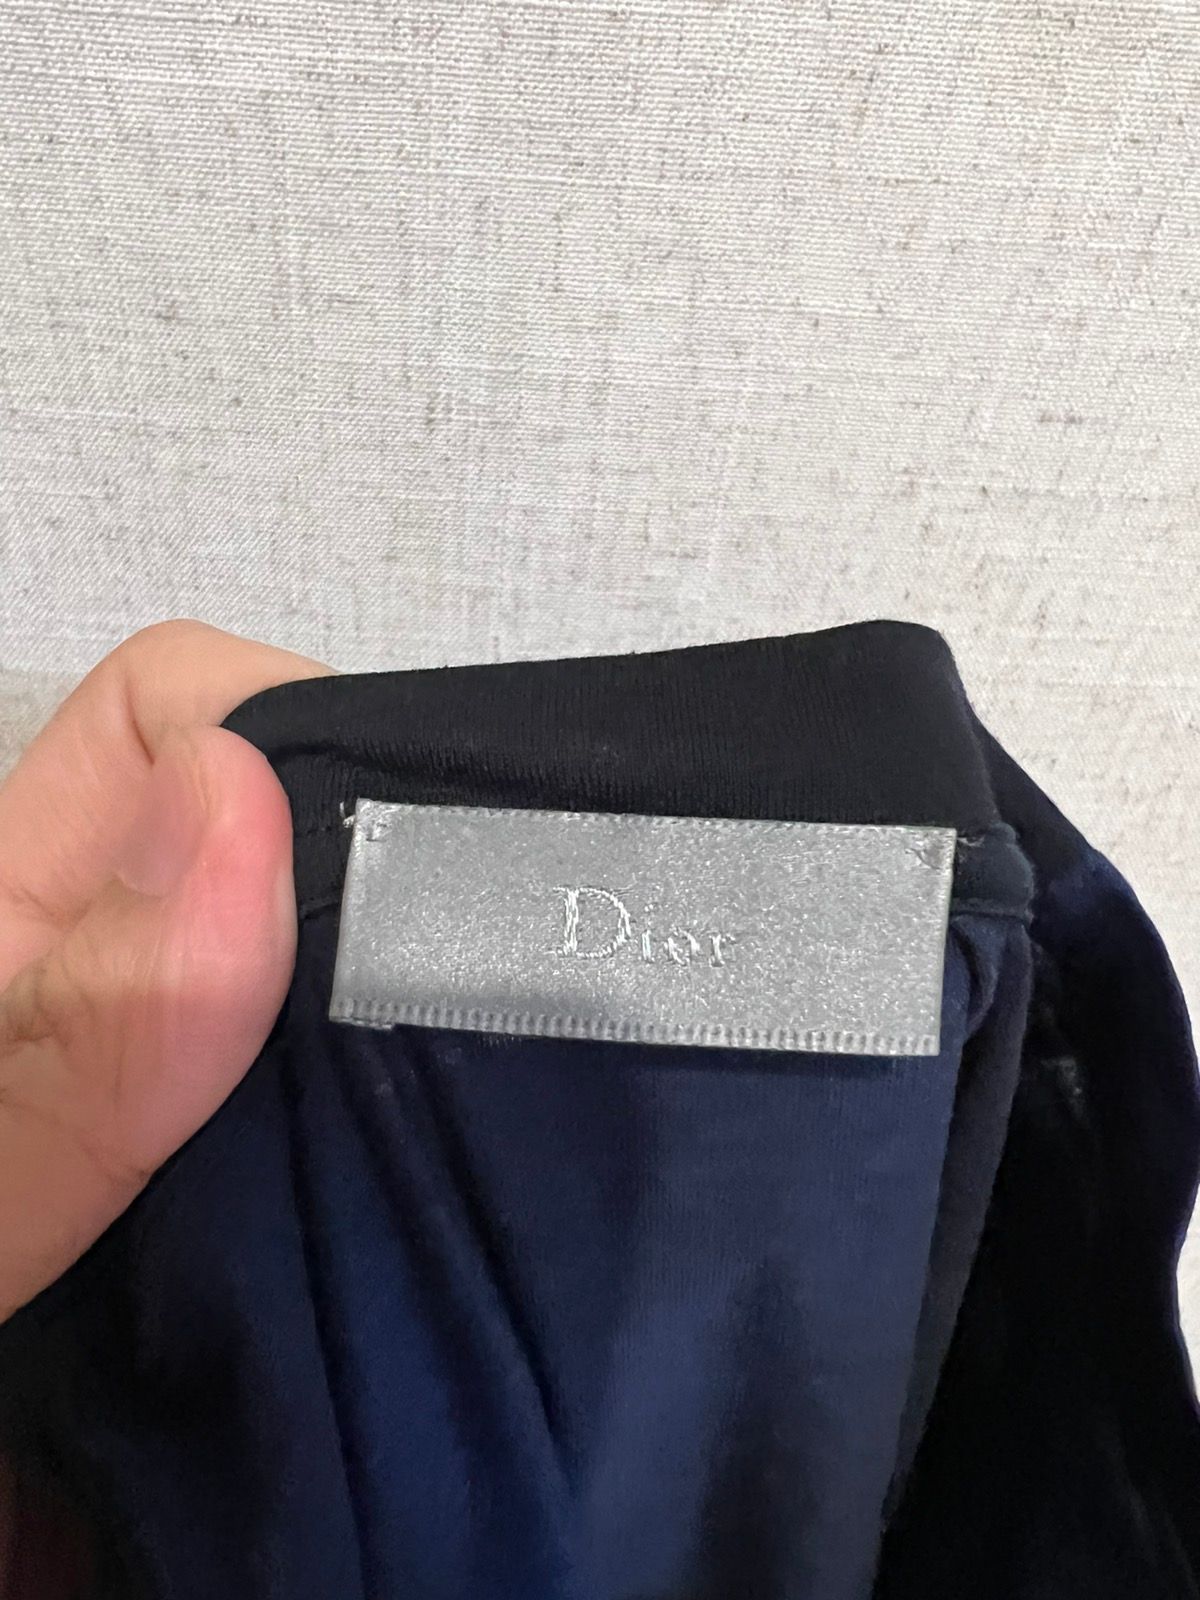 Christian Dior atelier store exclusive tee - 7